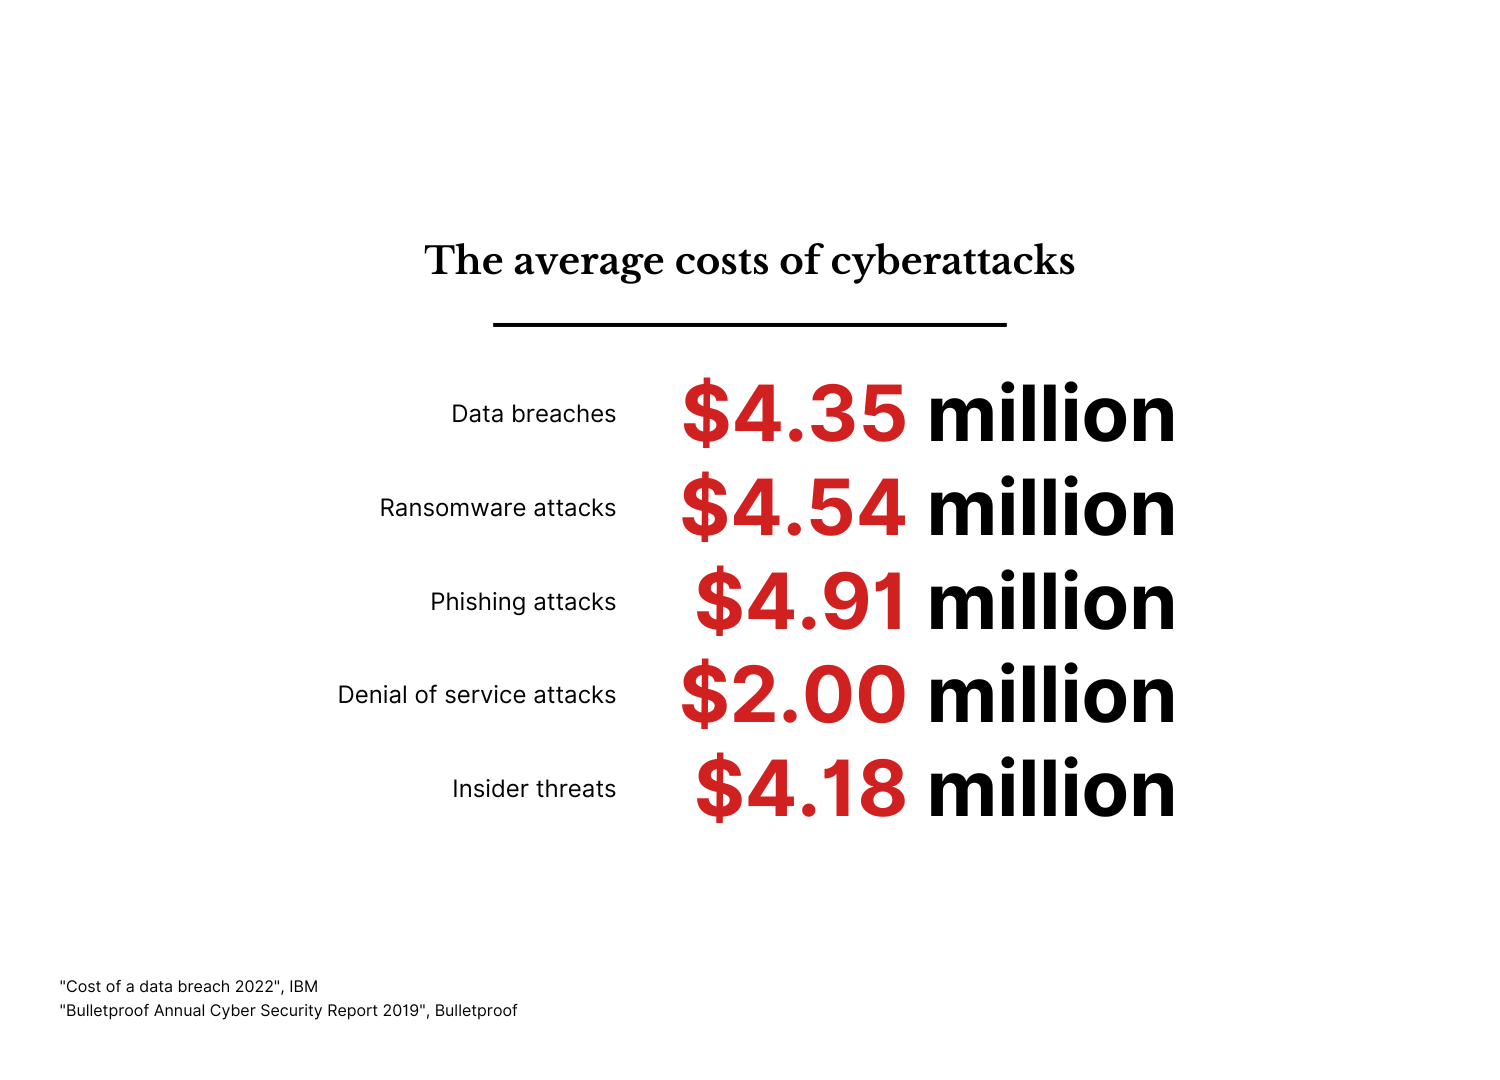 An infographic showing the average costs of cyberattacks.